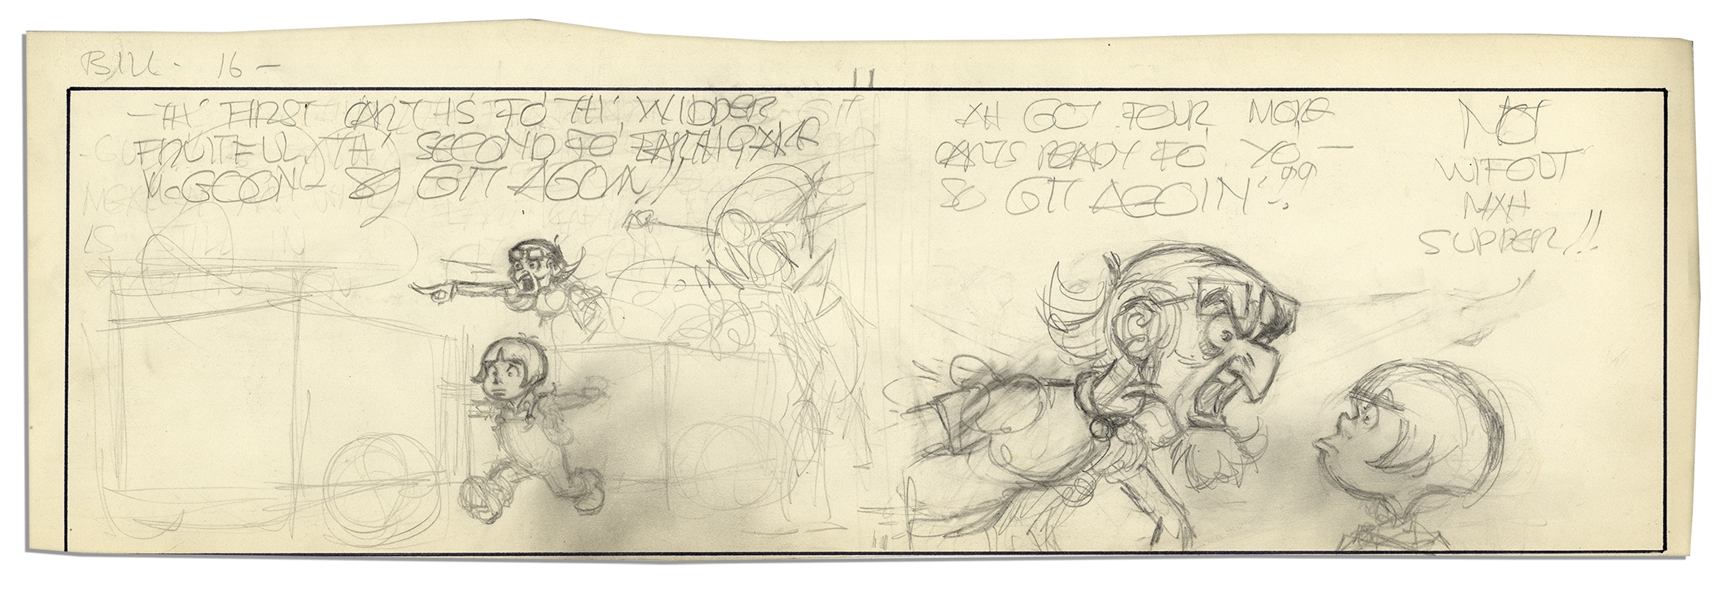 Al Capp Unfinished Comic Strip -- Both Sides Are Illustrated in Pencil With Ink Started to One Side -- 19.75'' x 6.25'' -- Near Fine -- From Al Capp Estate